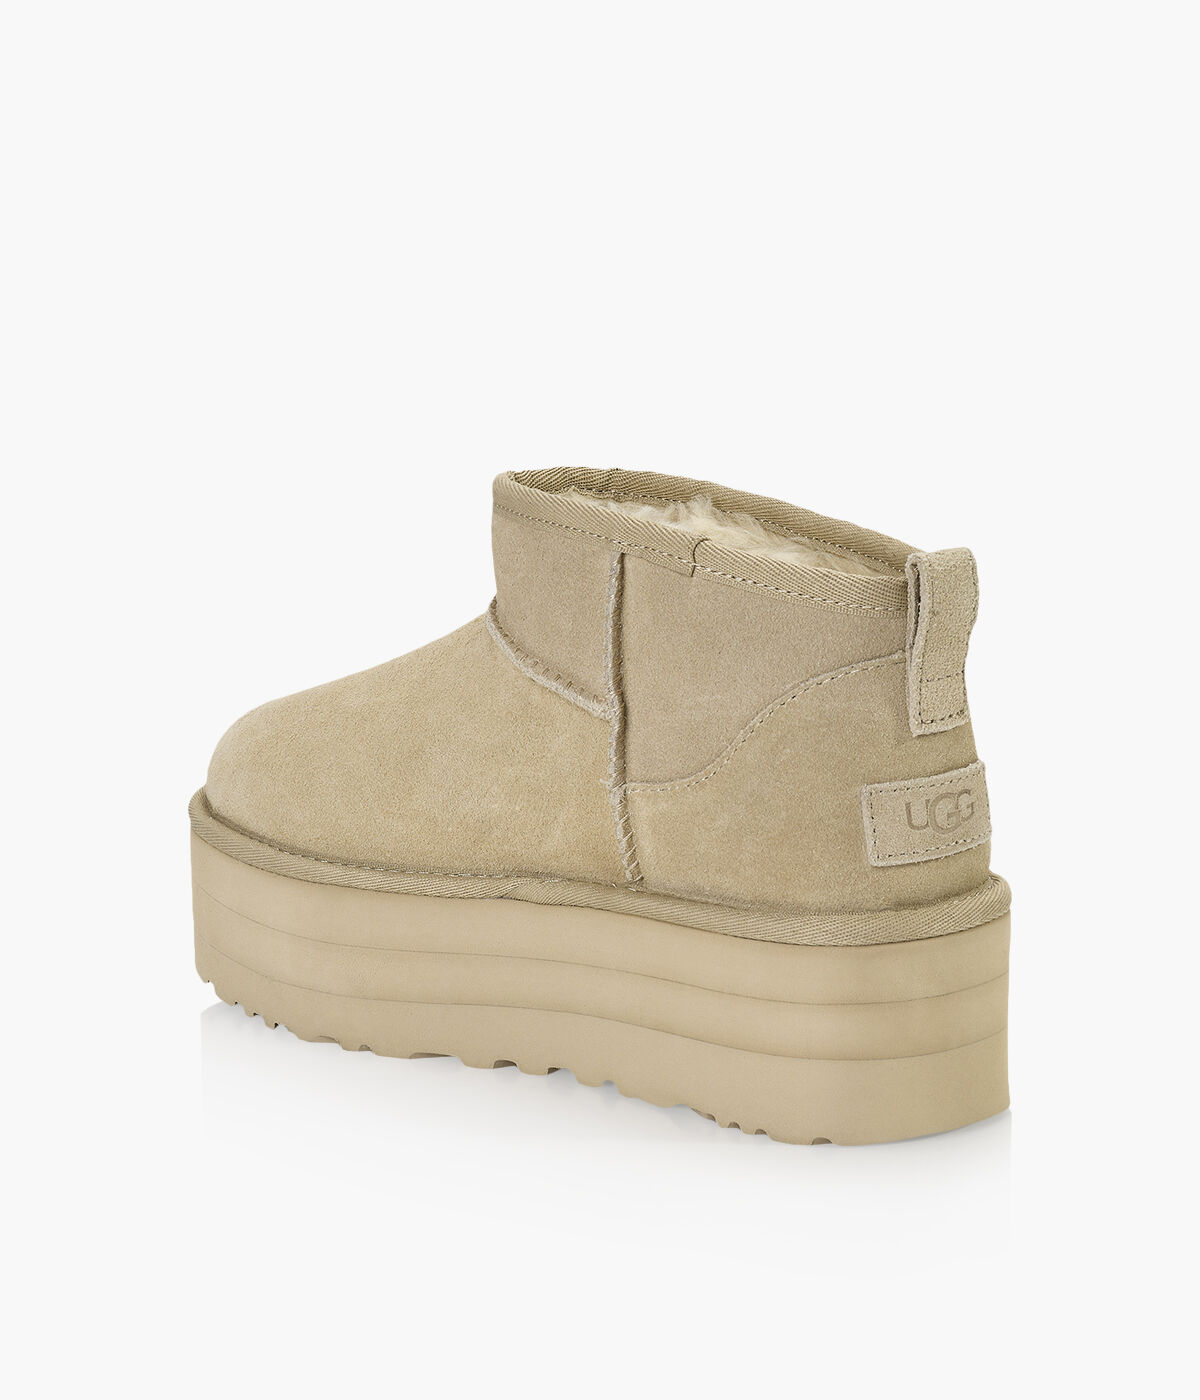 UGG CLASSIC ULTRA MINI PLATFORM - Suede | Browns Shoes